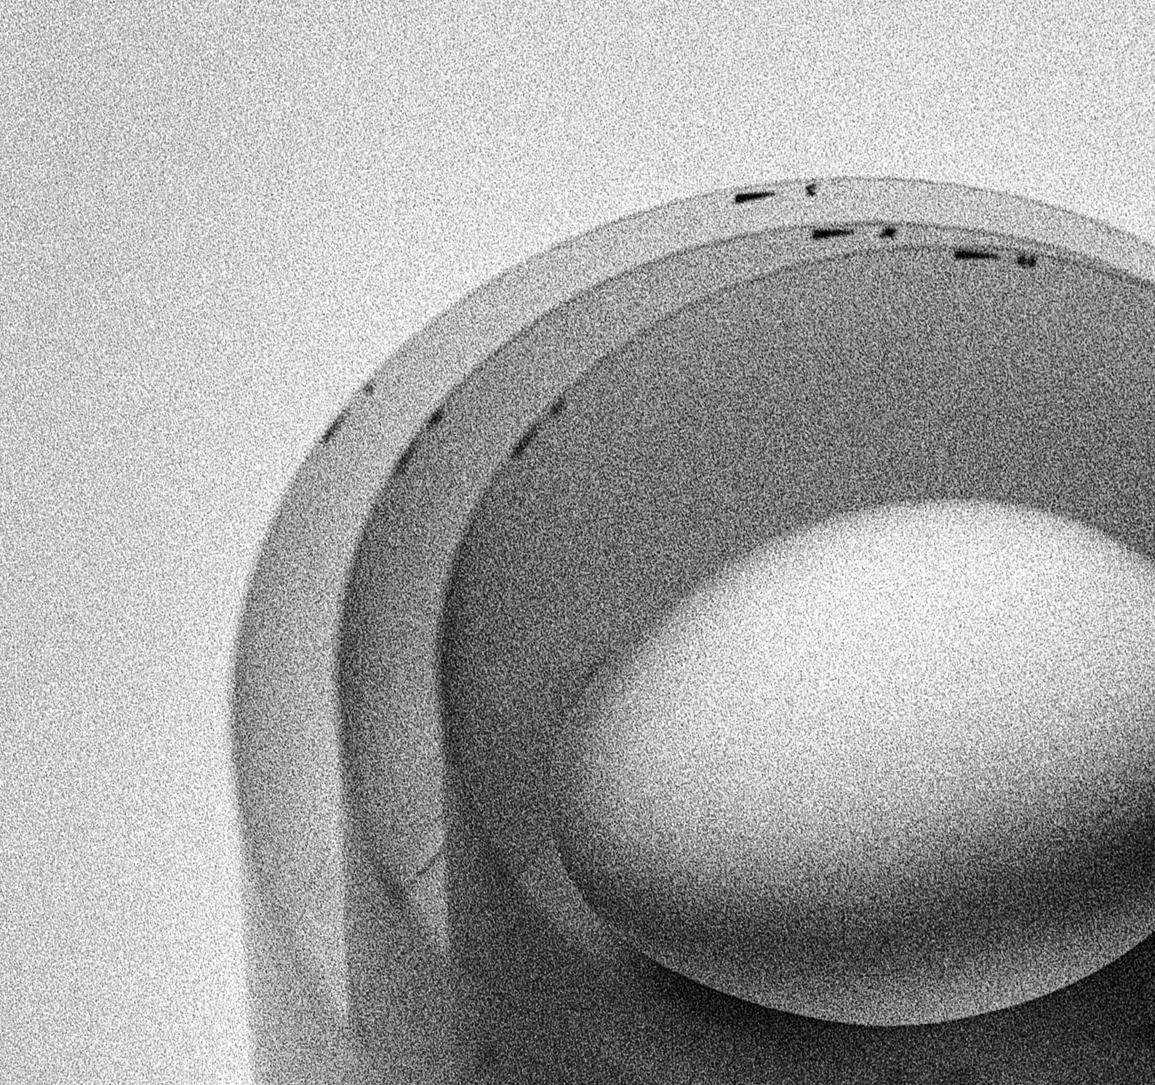 Egg Study 6 and 8 (Diptych), 2021 by Shine Huang
Silver gelatin print on Ilford Fiber Paper.
Overall size: 20 in. H x 32 in. W

Individual size:
Image size: 20 in. H x 16 in. W
Edition 1/9

Signed on verso in